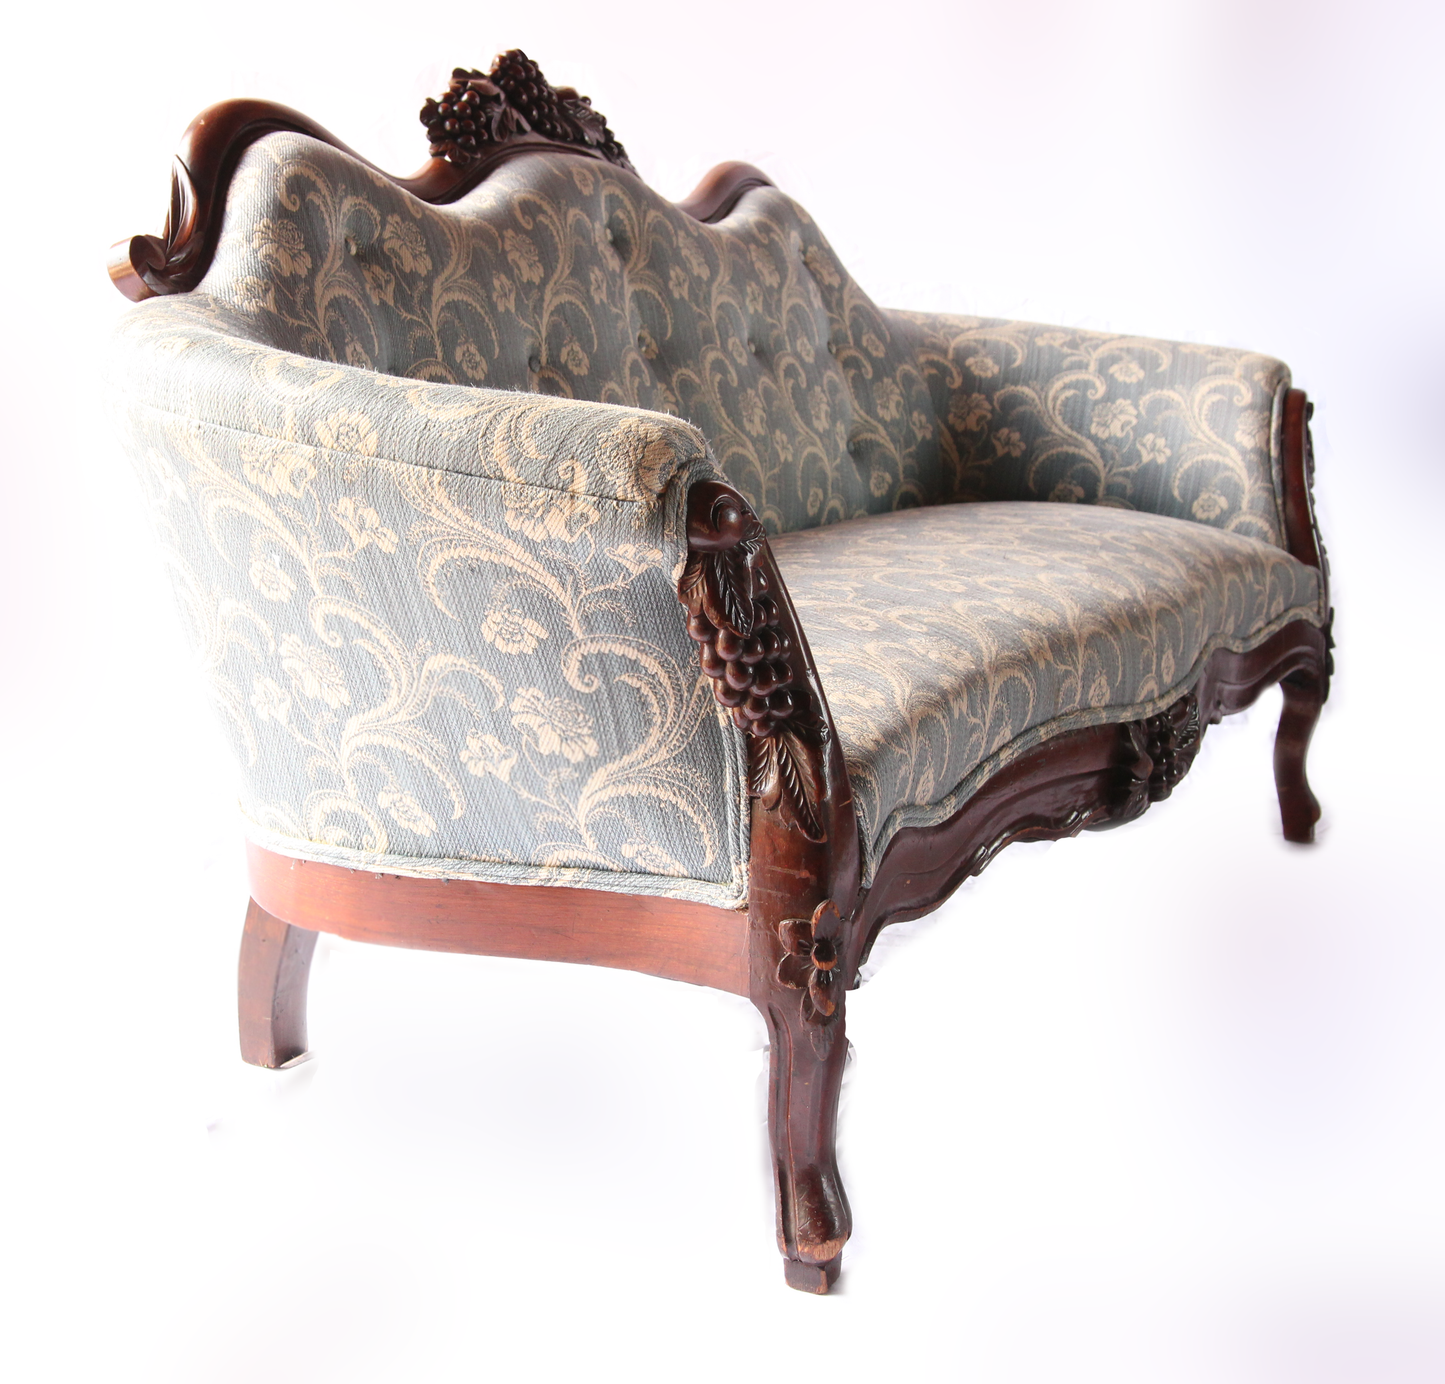 Ornate Blue Upholstered Victorian Camelback Sofa with Grape Carving Motif